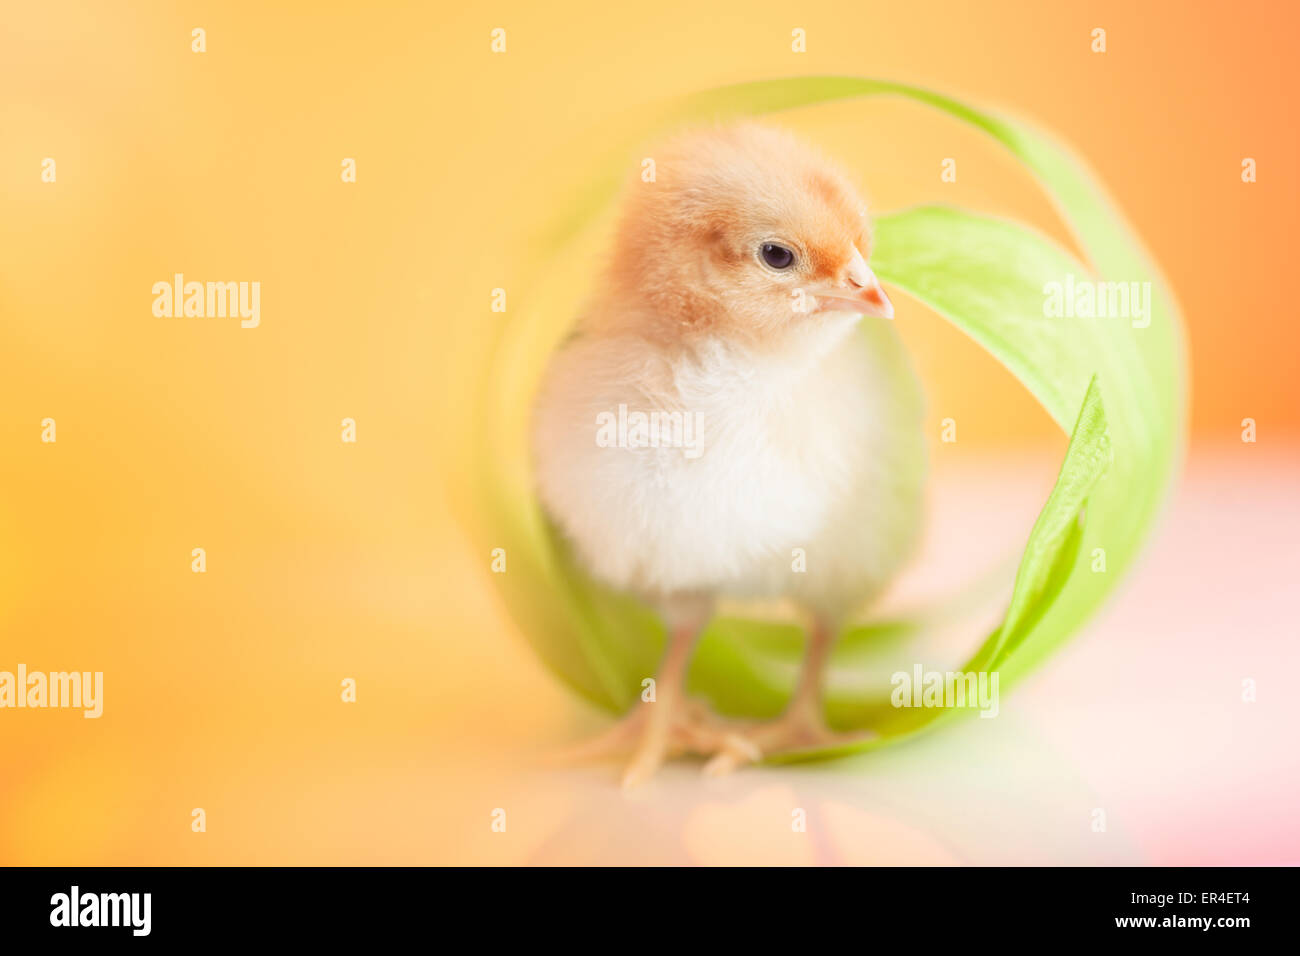 Baby chick on a beautifully lit table Stock Photo